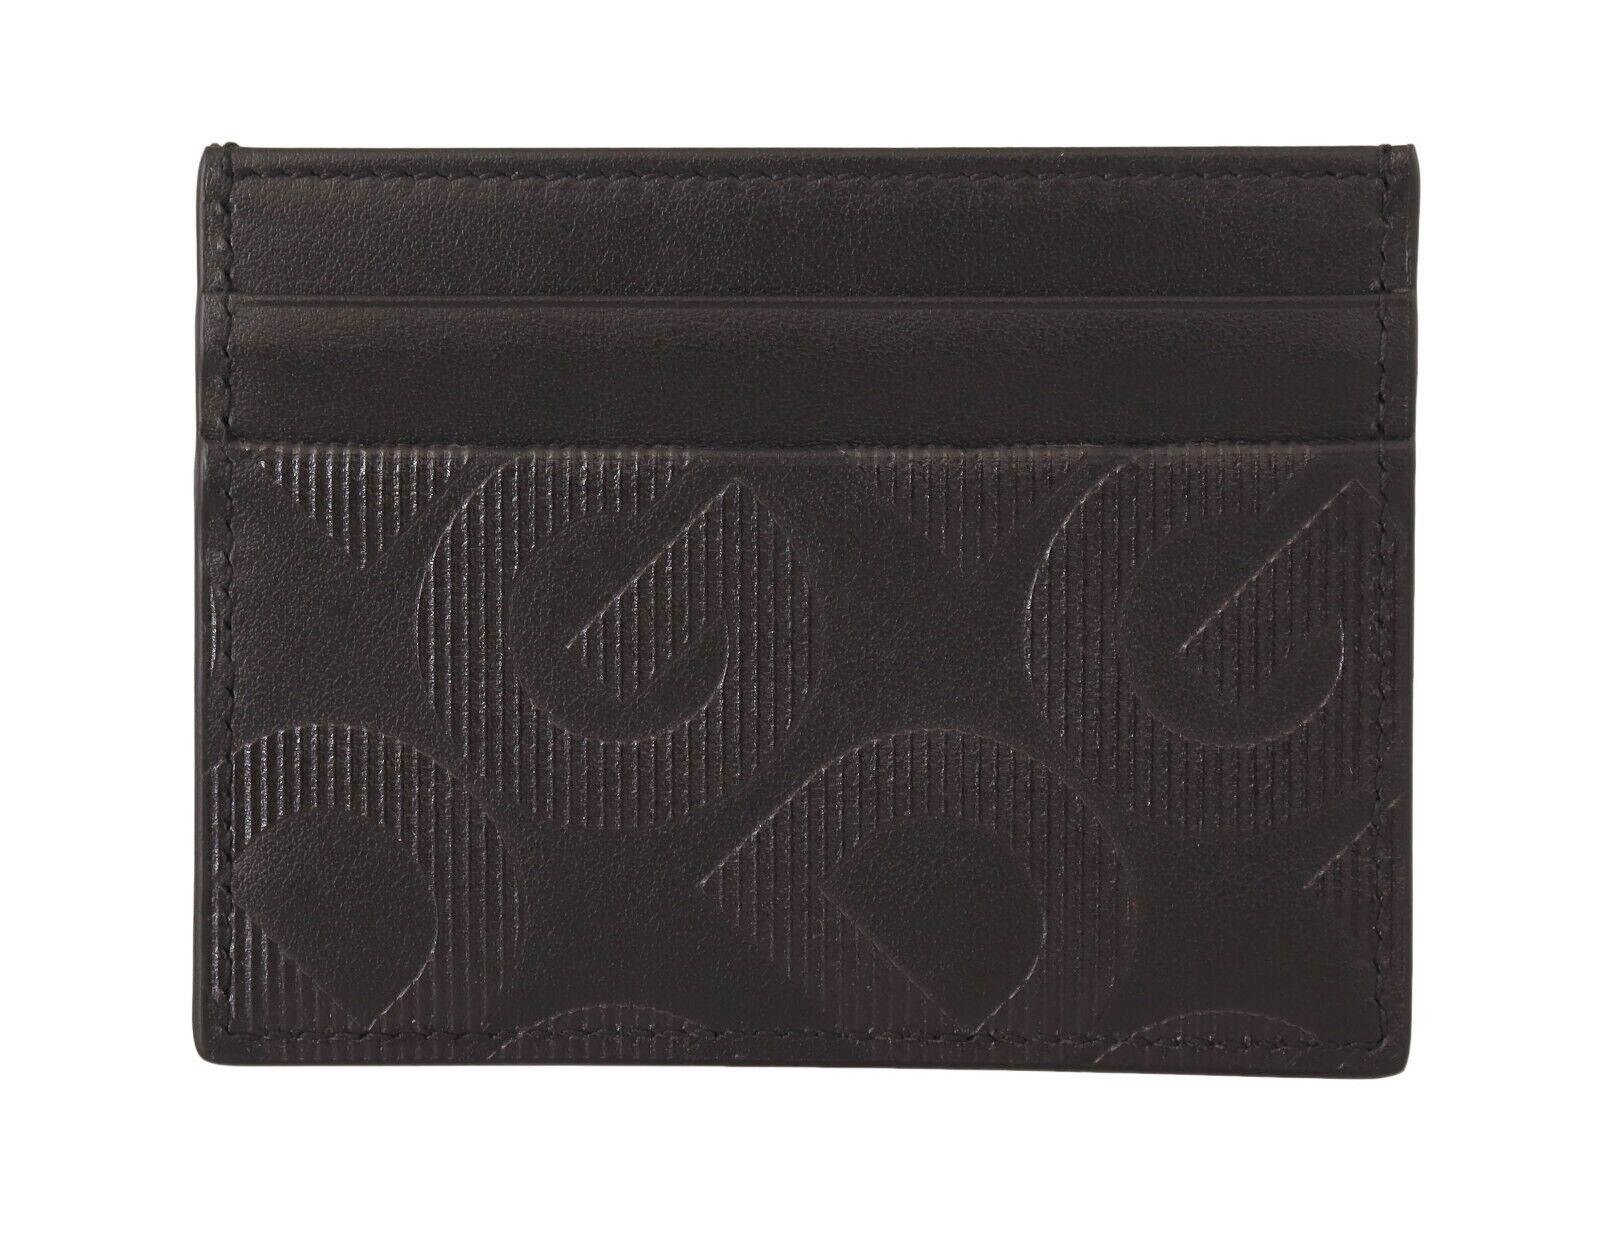 DOLCE & GABBANA

Absolutely stunning, 100% Authentic, brand new with tags Dolce & Gabbana black cardholder was made by the masters of the brand from soft leather, resistant to scratches and creases. The accessory with four slots for plastic cards